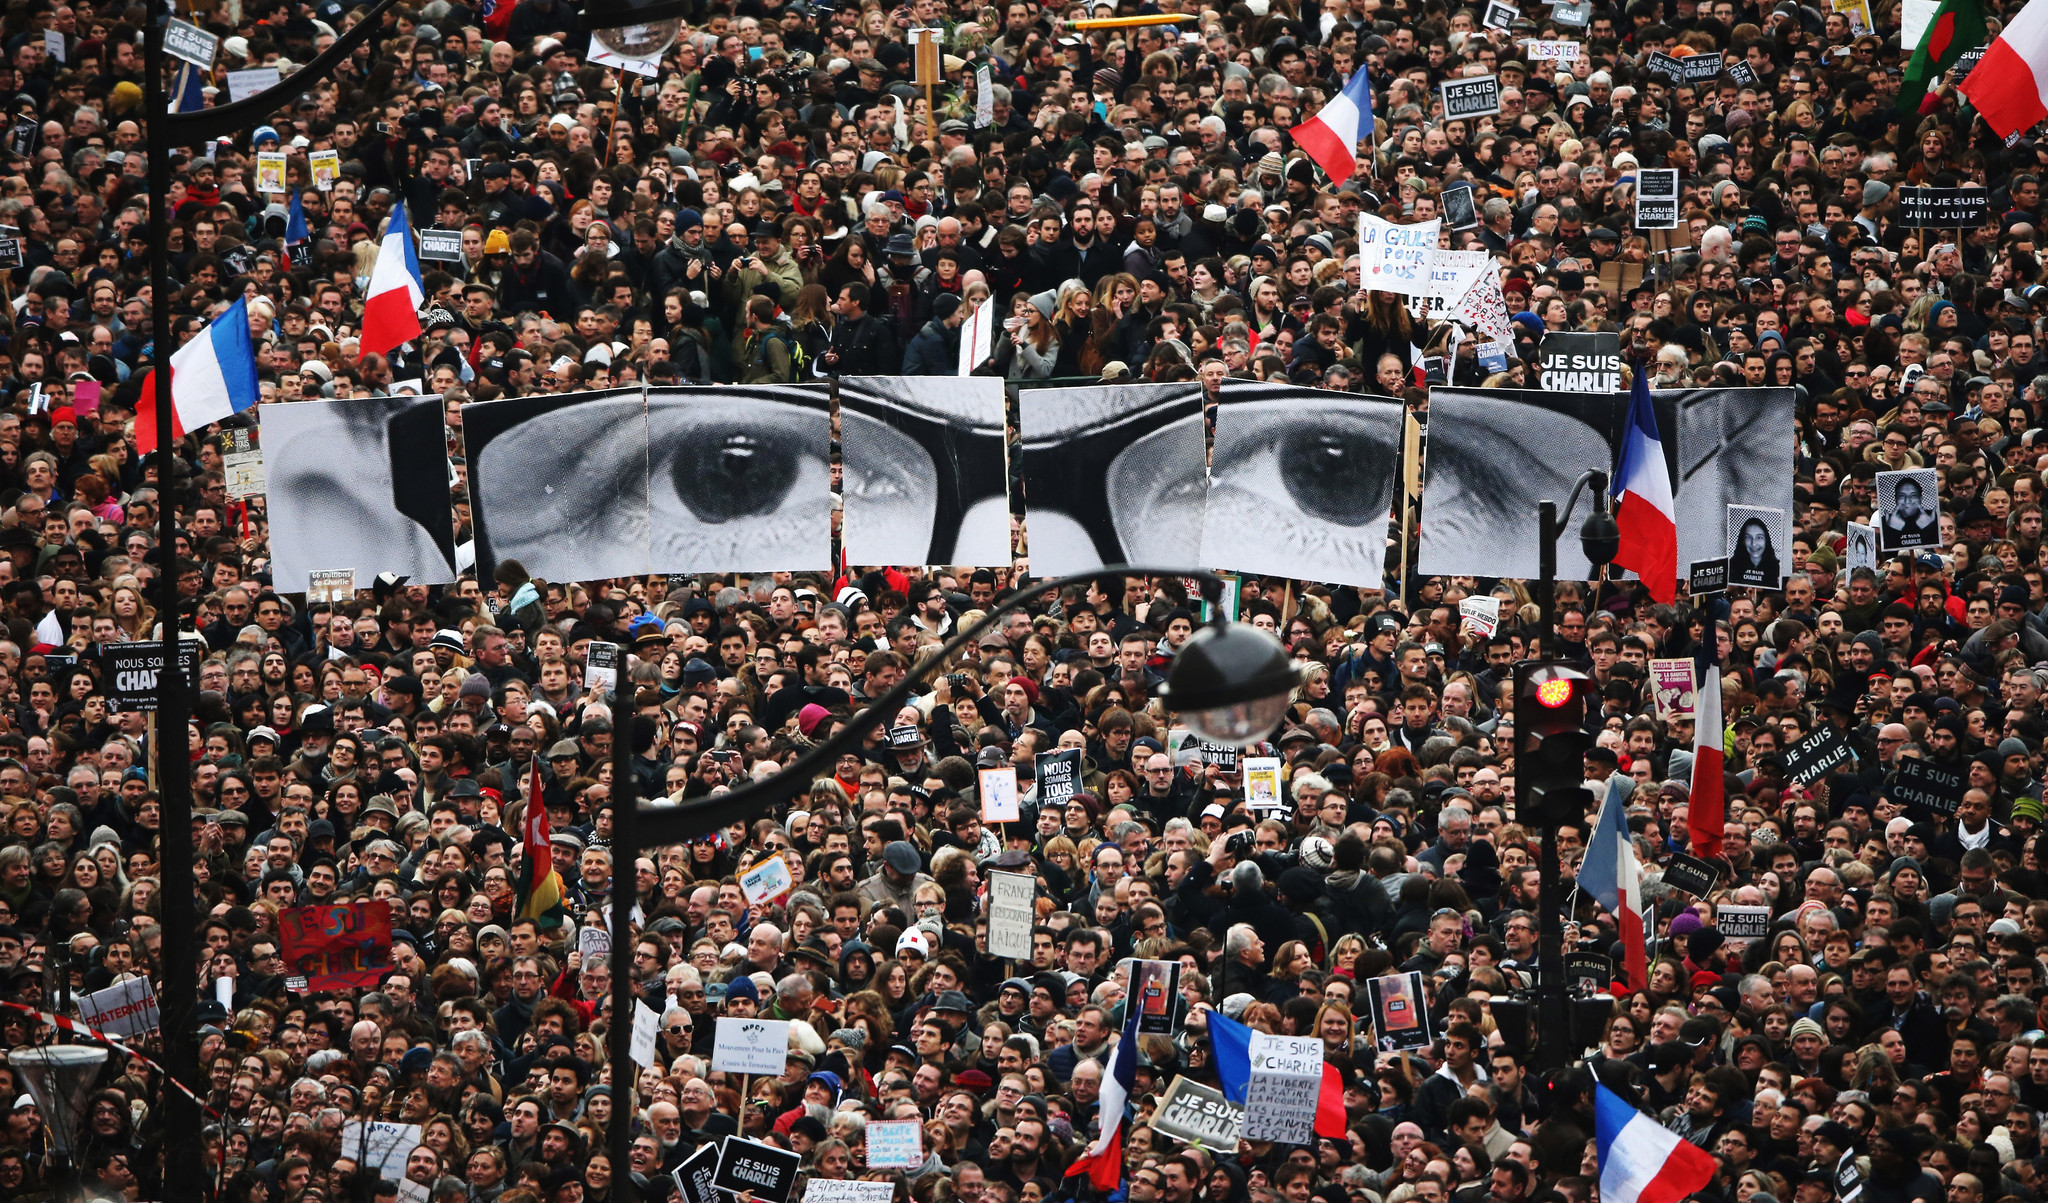 Demonstrators make their way along Boulevard Voltaire in a unity rally in Paris following terrorist attacks.